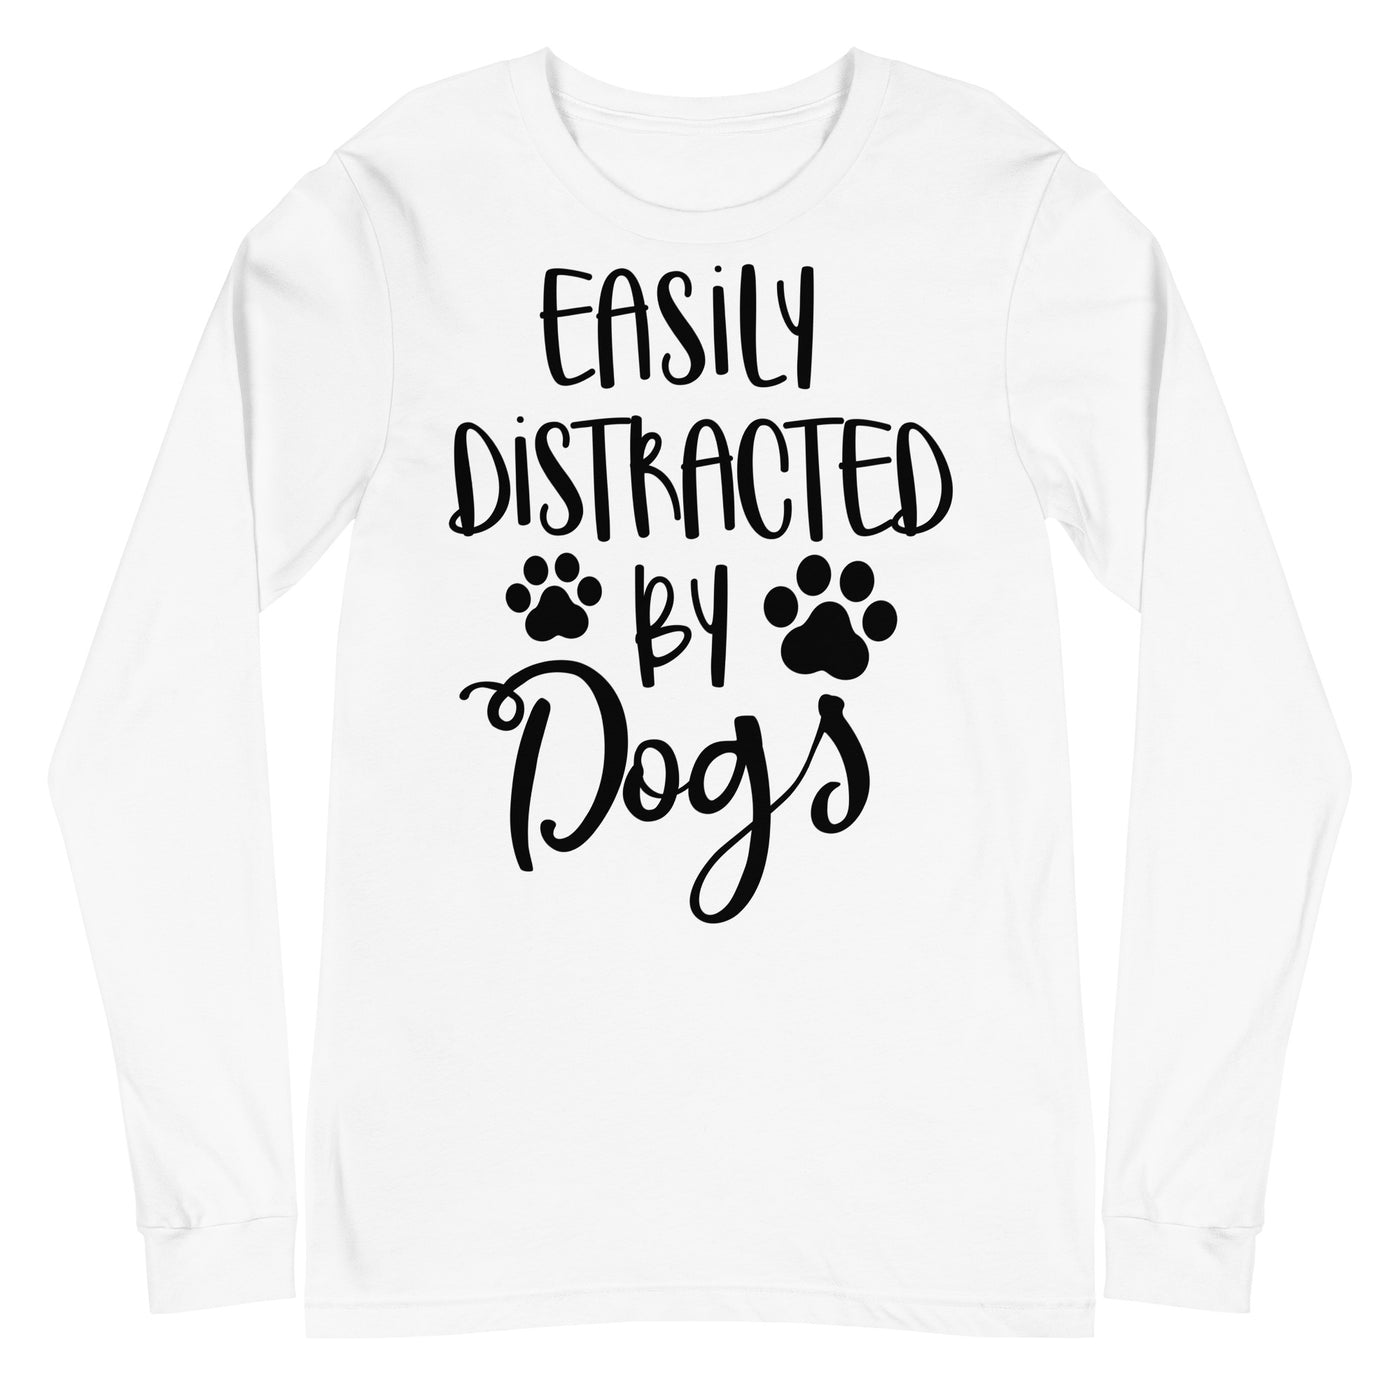 Easily Distracted By Dogs Version 2 Long Sleeves